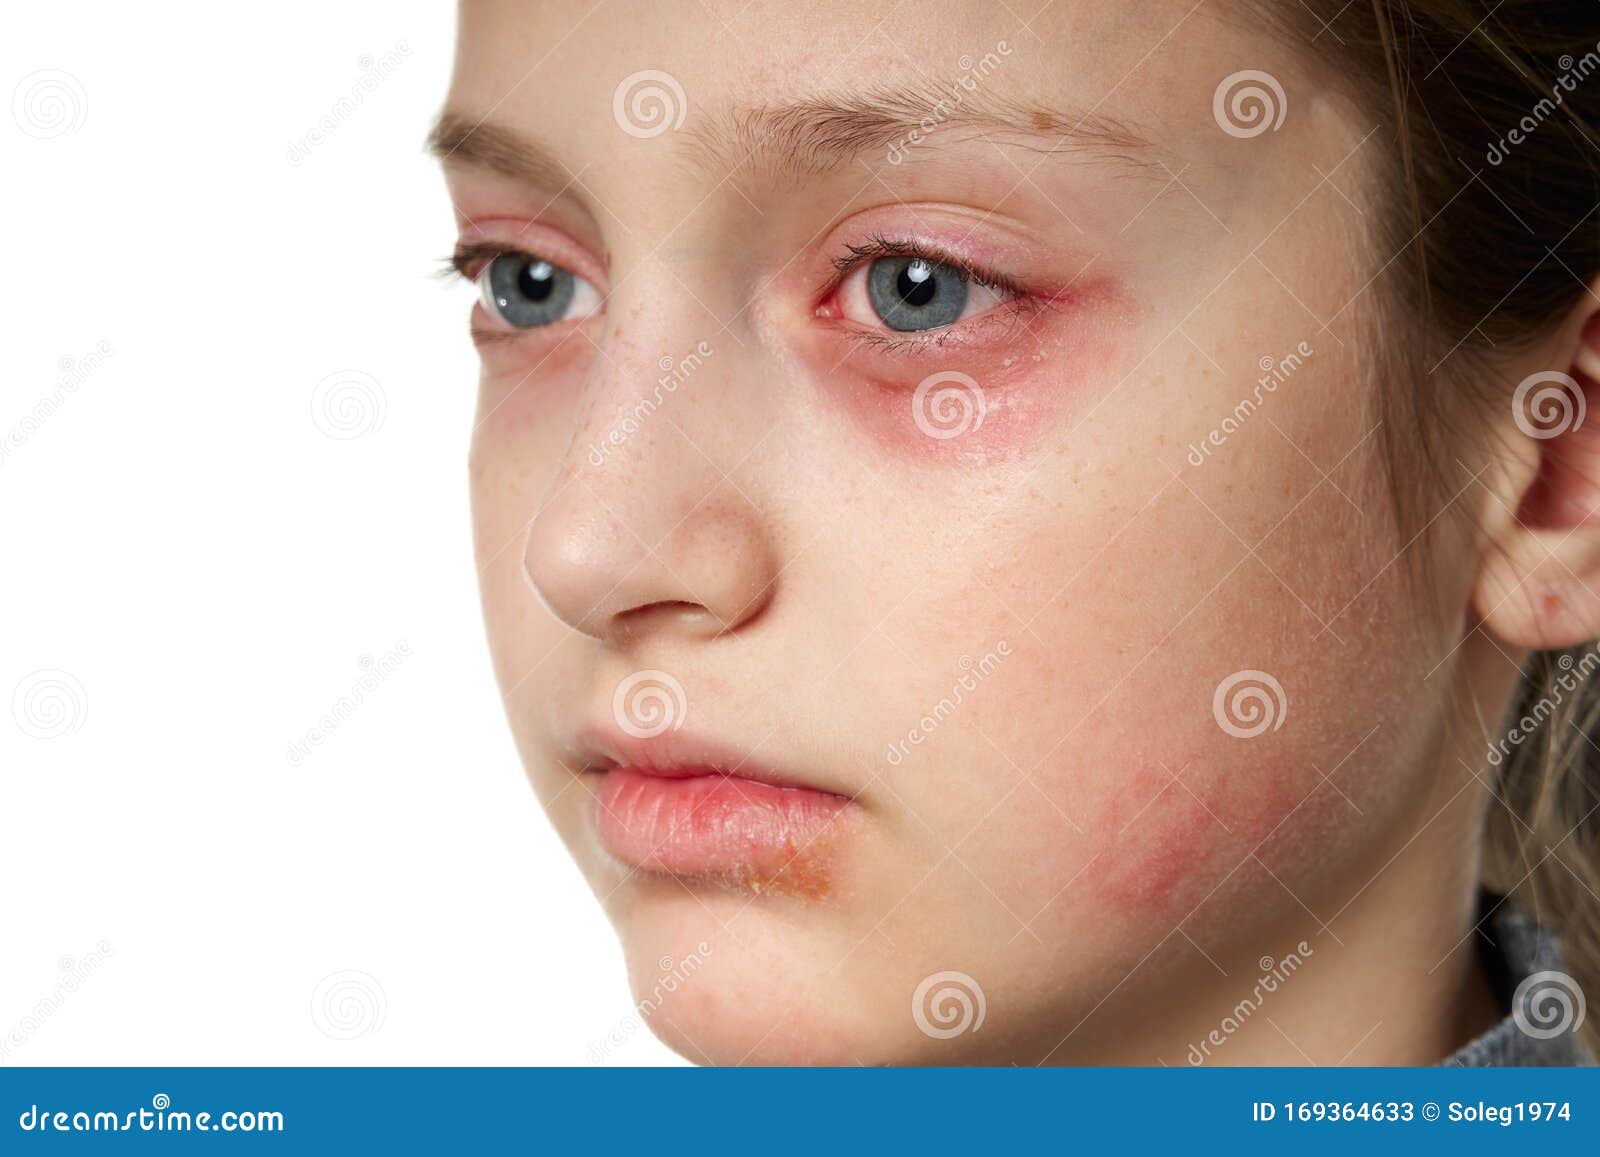 allergic reaction, skin rash, close view portrait of a girl`s face. redness and inflammation of the skin in the eyes and lips.